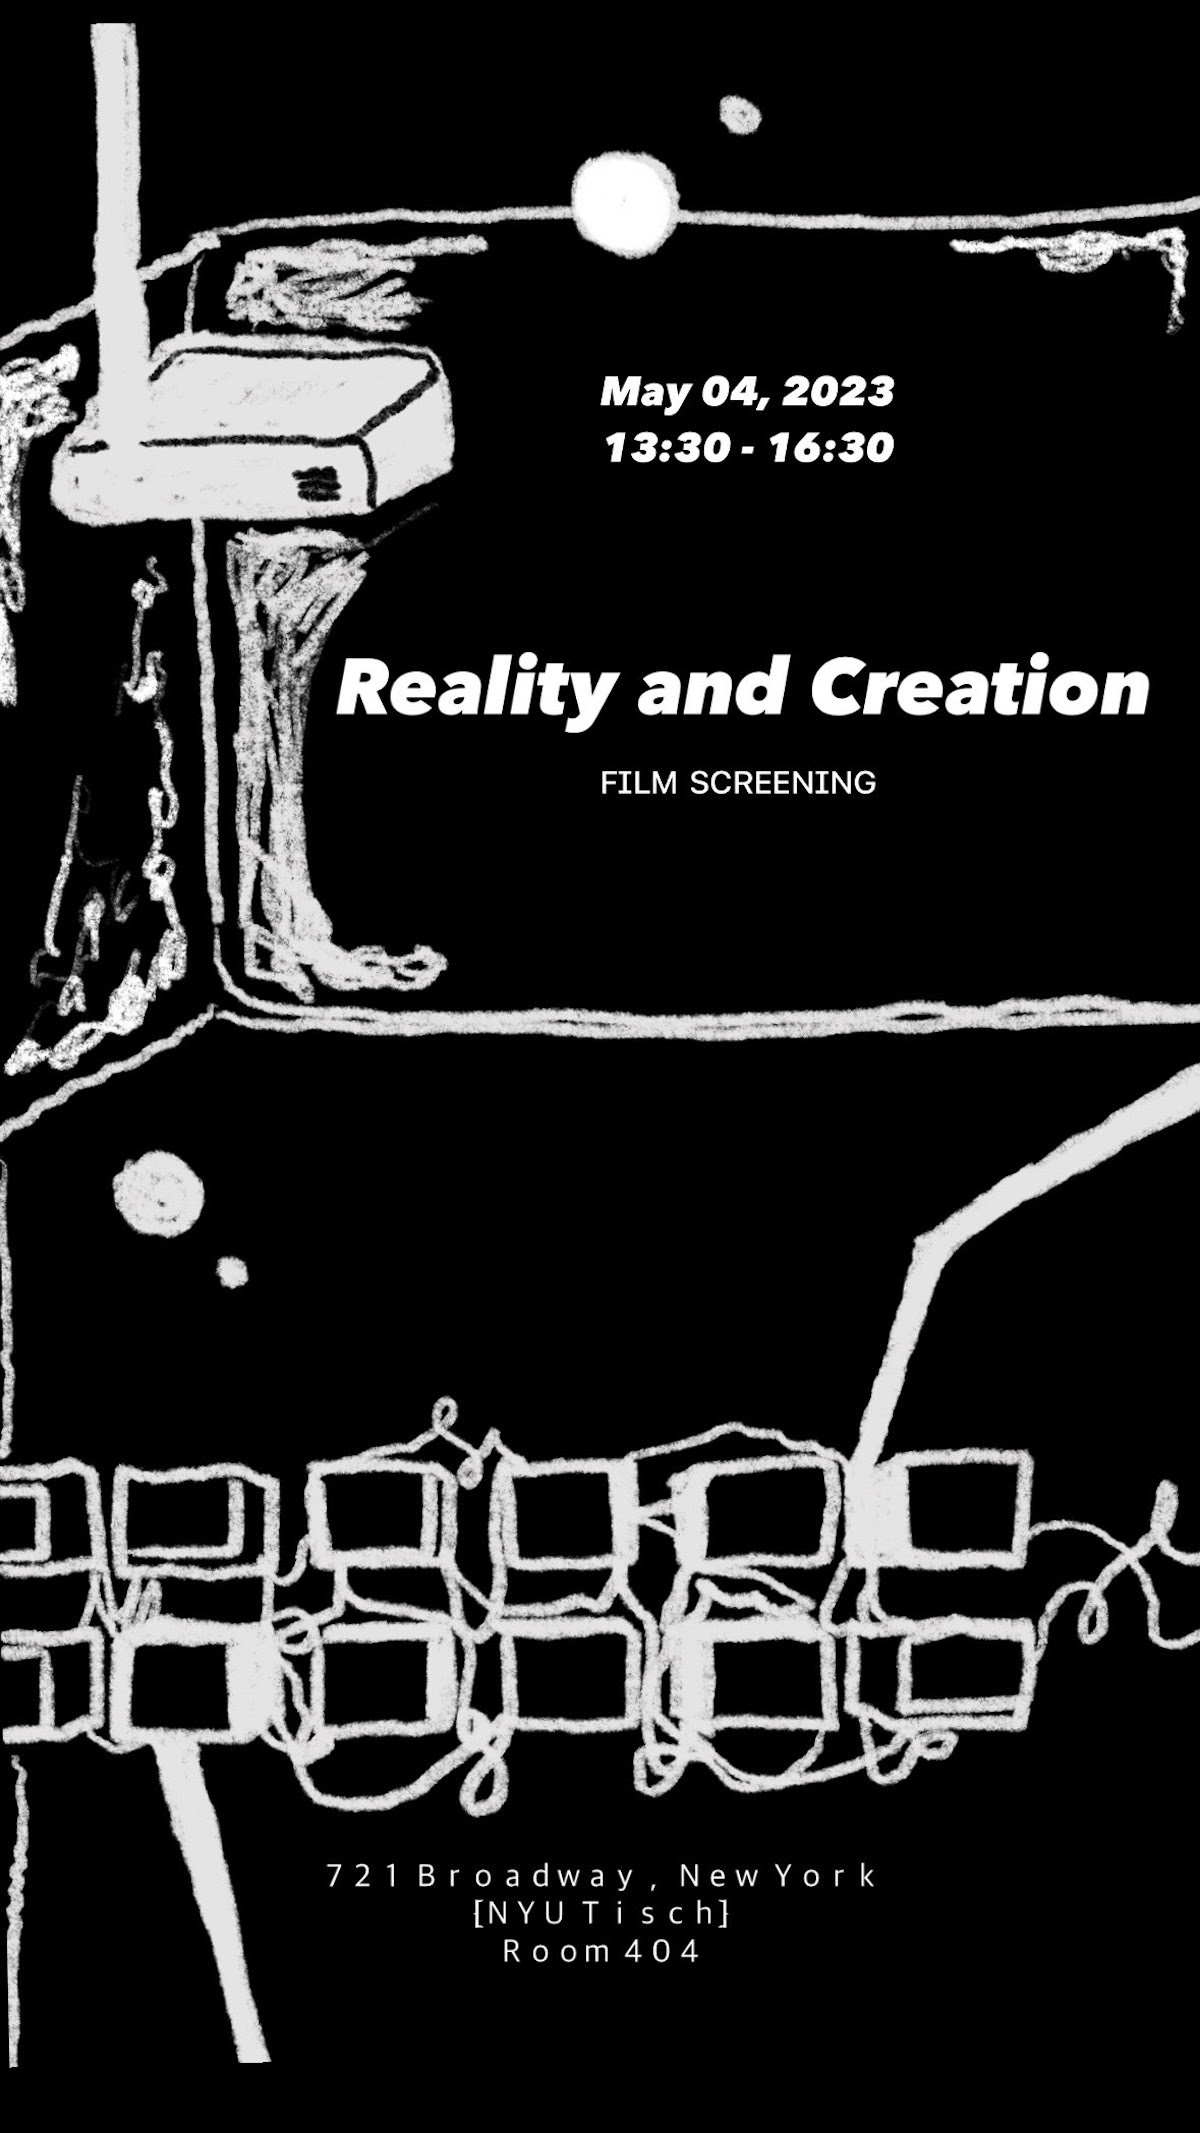 Reality and Creation Screening Flyer